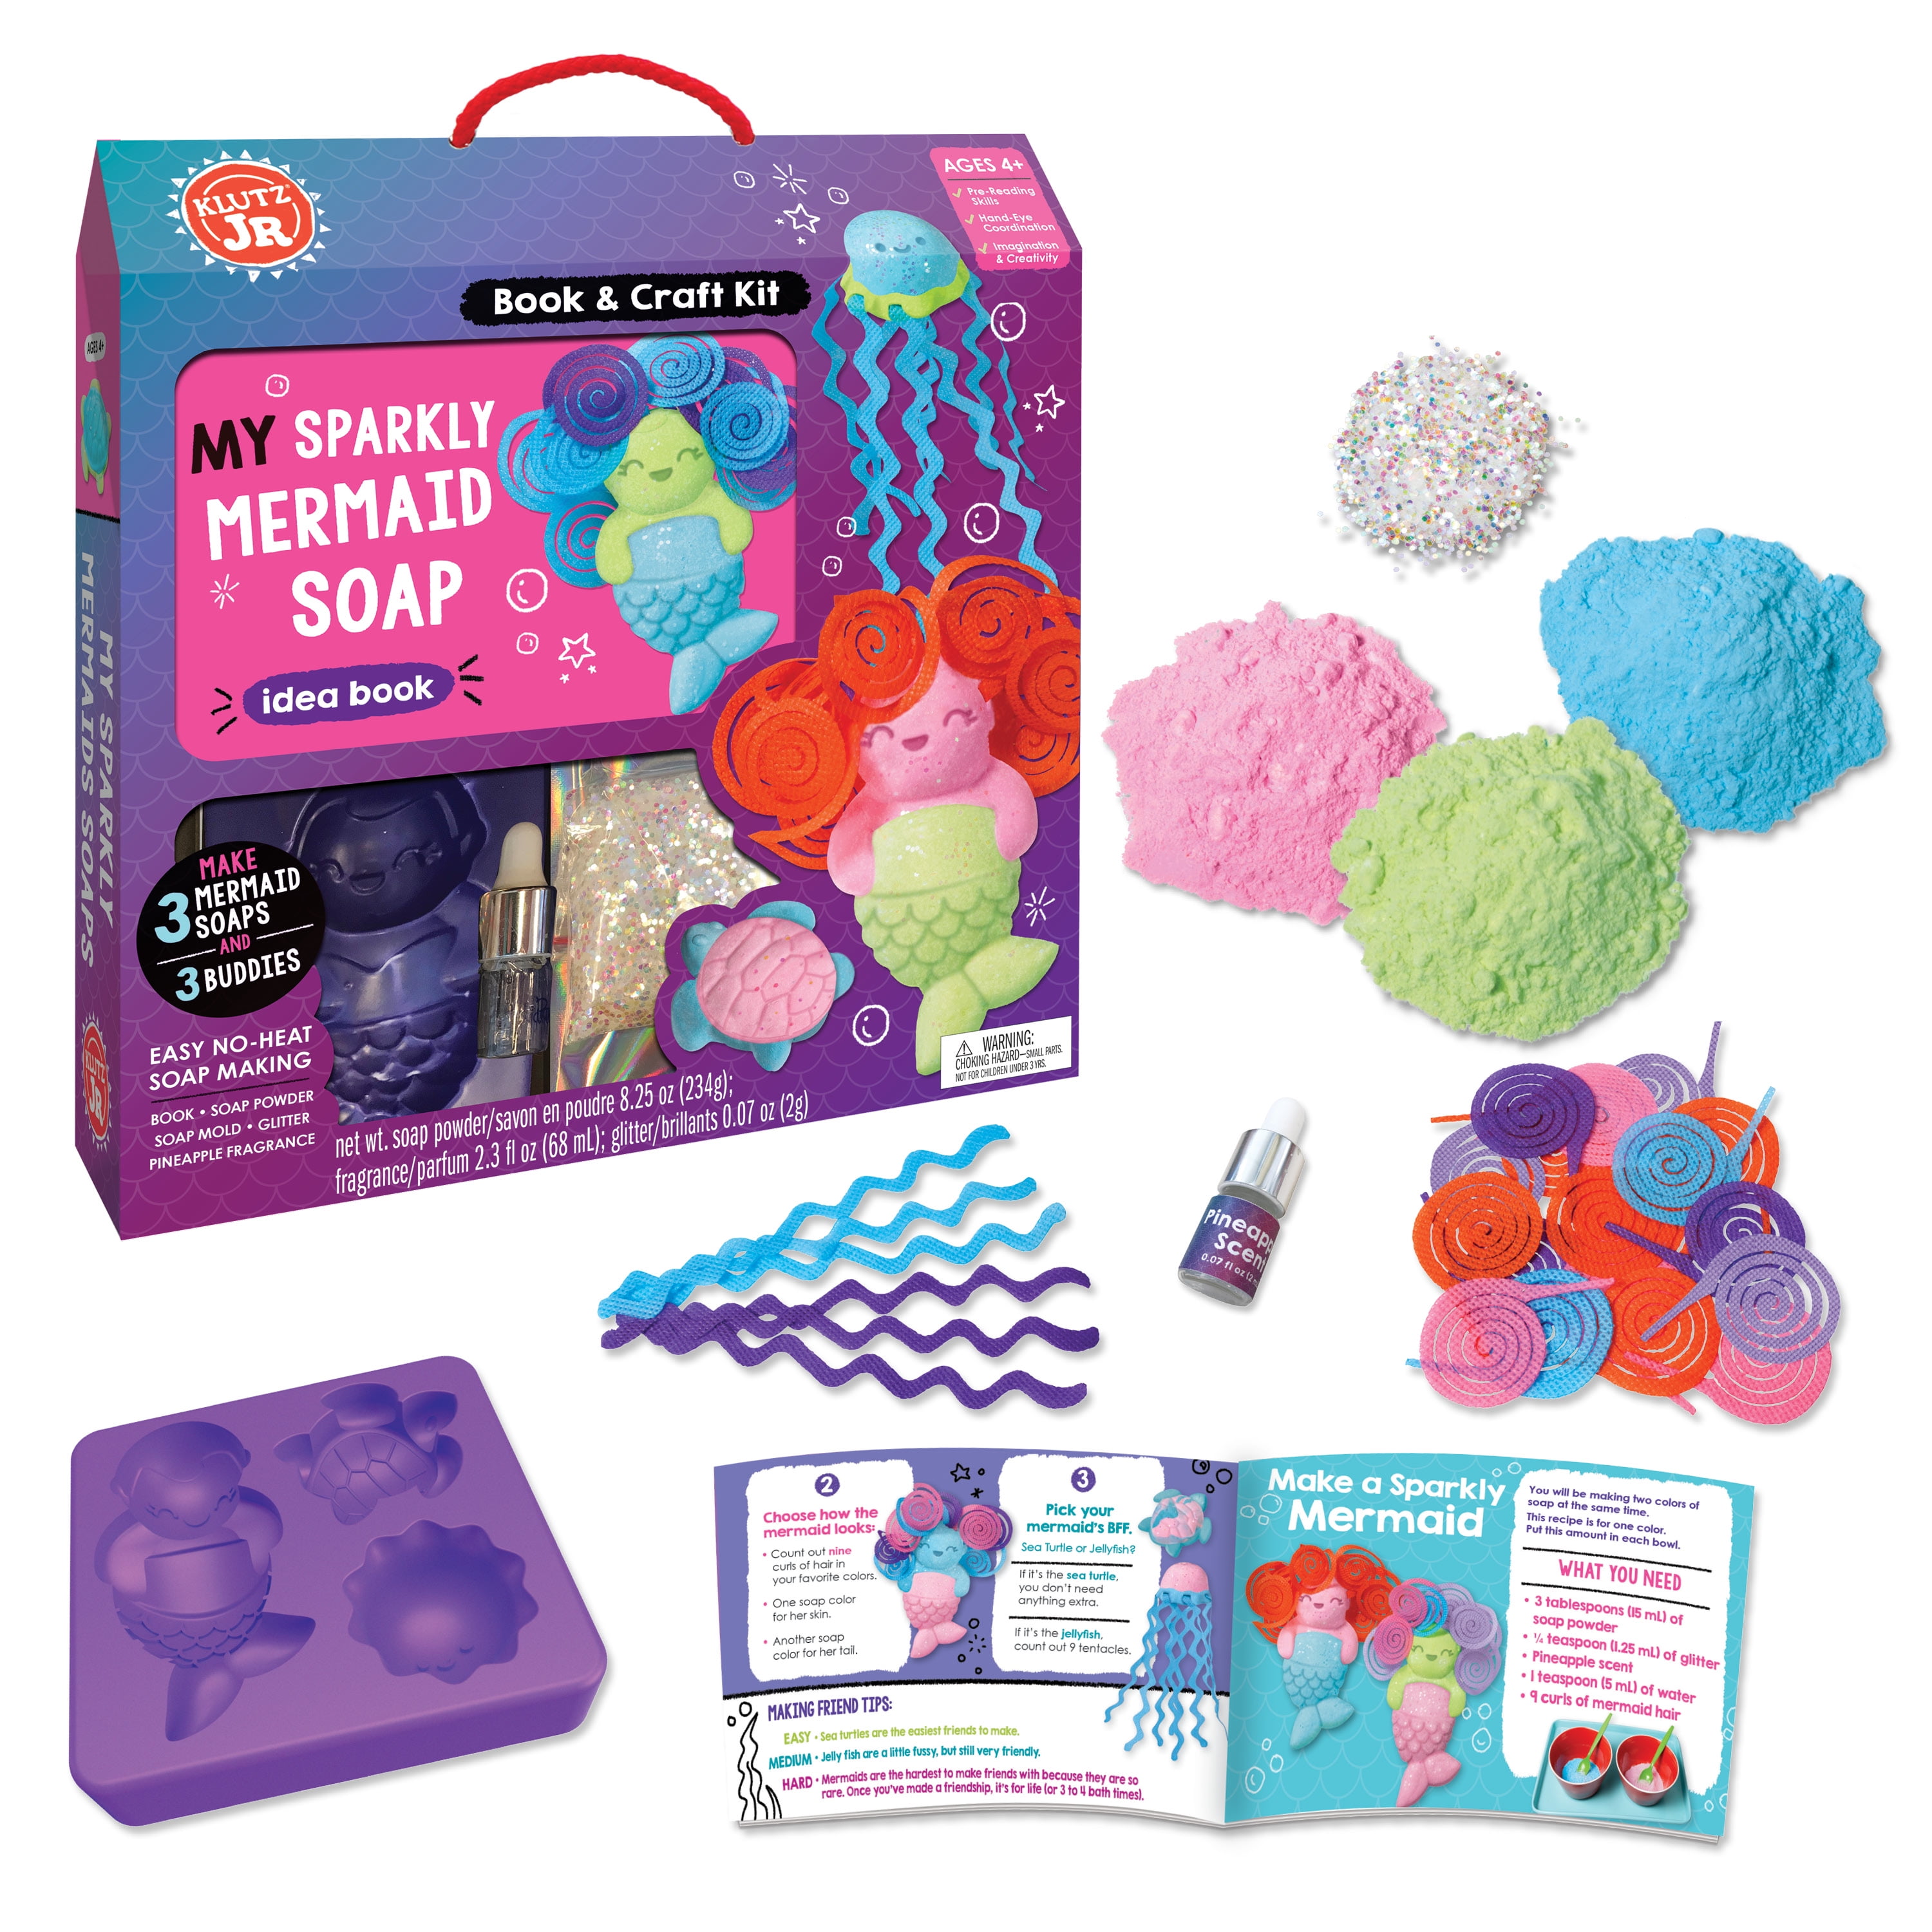  KLUTZ Make Your Own Soap Jellies Craft Kit : Arts, Crafts &  Sewing